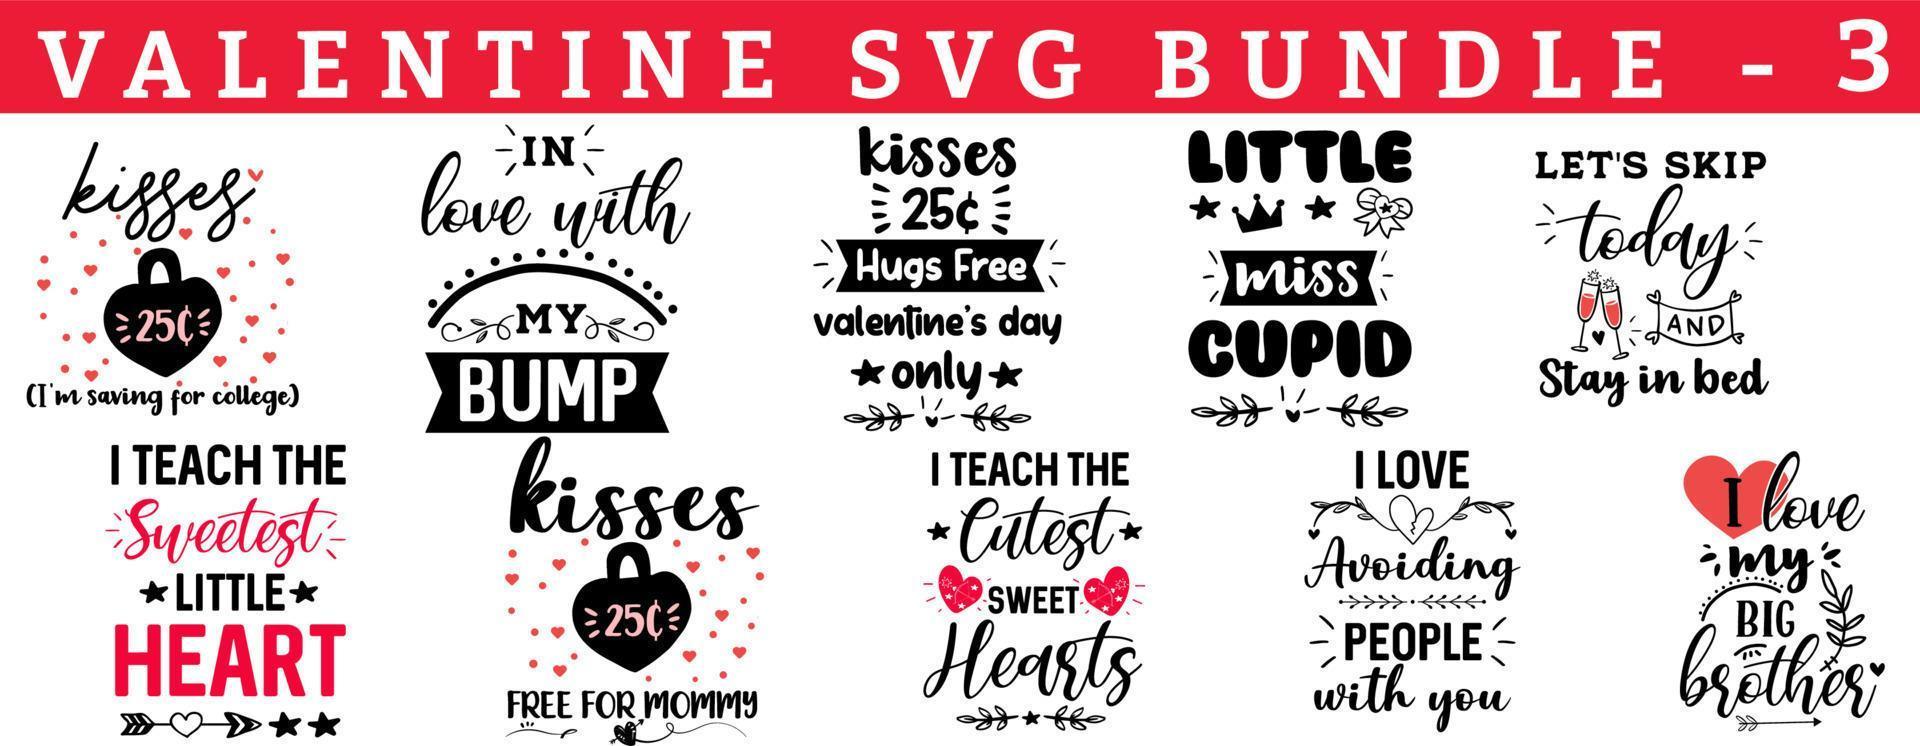 Valentine's DAY Vector SVG Bundle. Quote and sayings for Valentines day cards and prints. Best for t shirt, card, mug, pillow, background, banner, poster. kiss, bump, hug, cupid, sweet, cute, brother